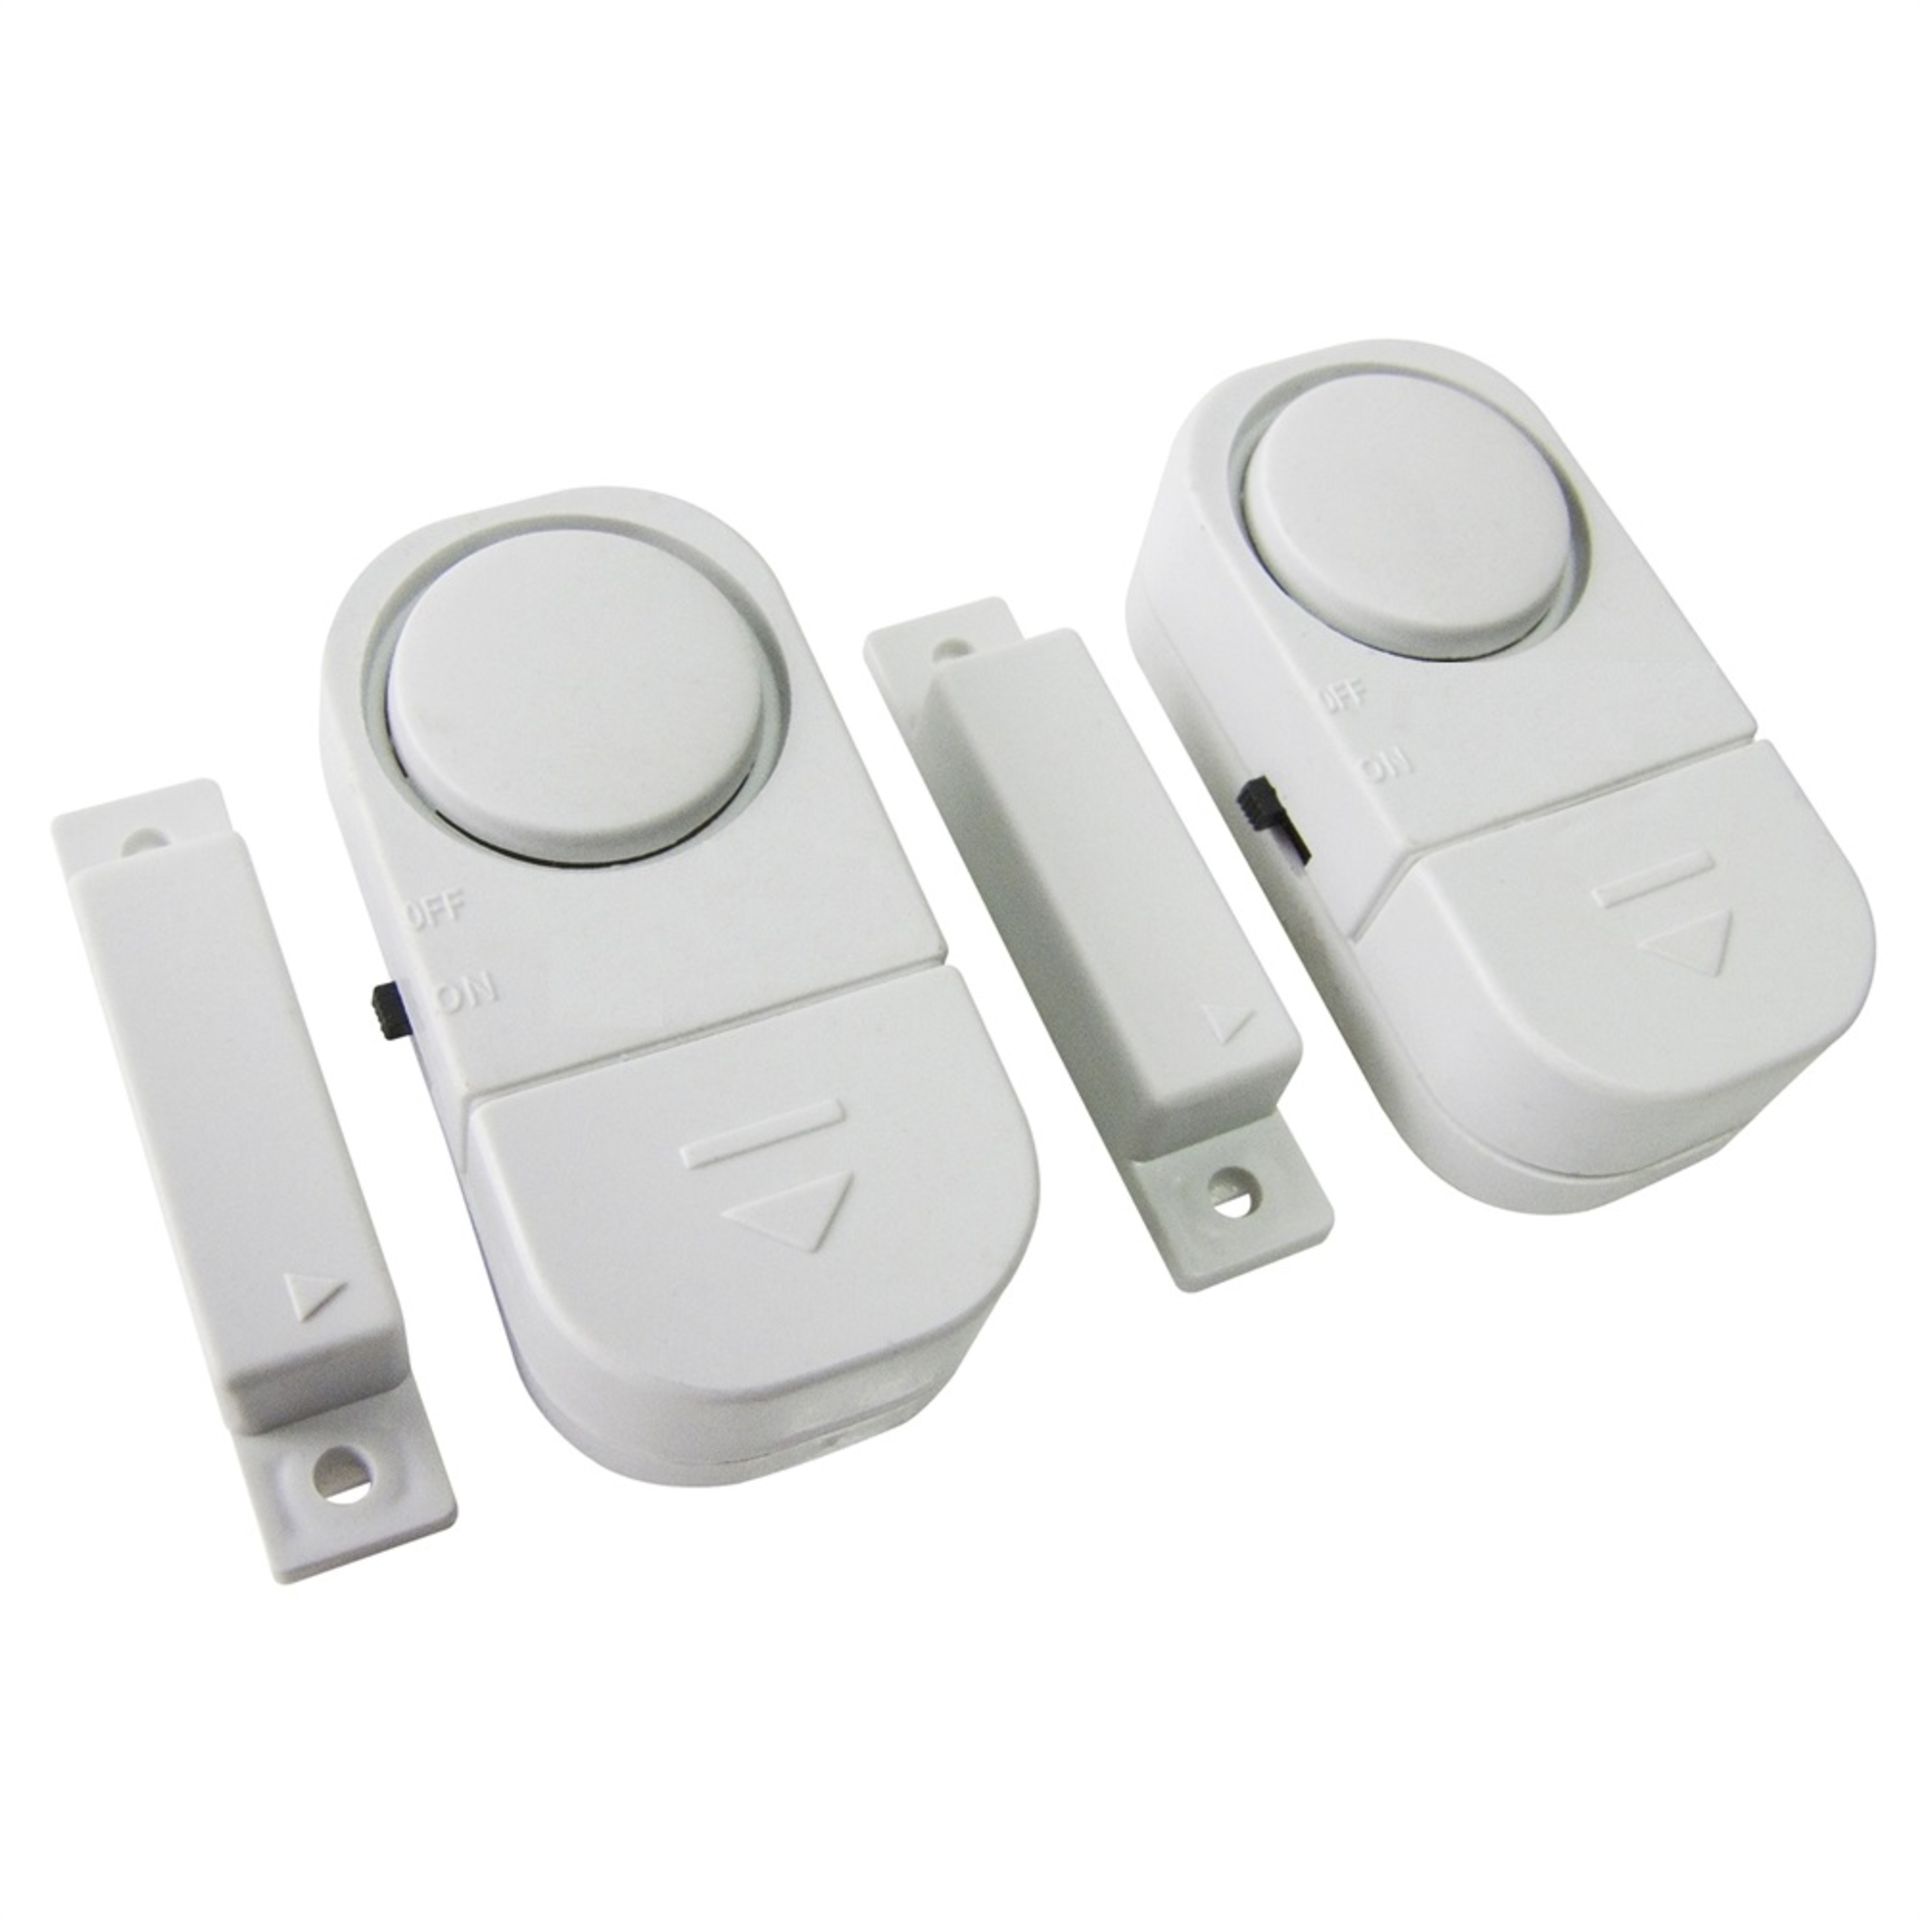 V Brand New 2 Piece Door And Window Entry Alarm Set X 2 YOUR BID PRICE TO BE MULTIPLIED BY TWO